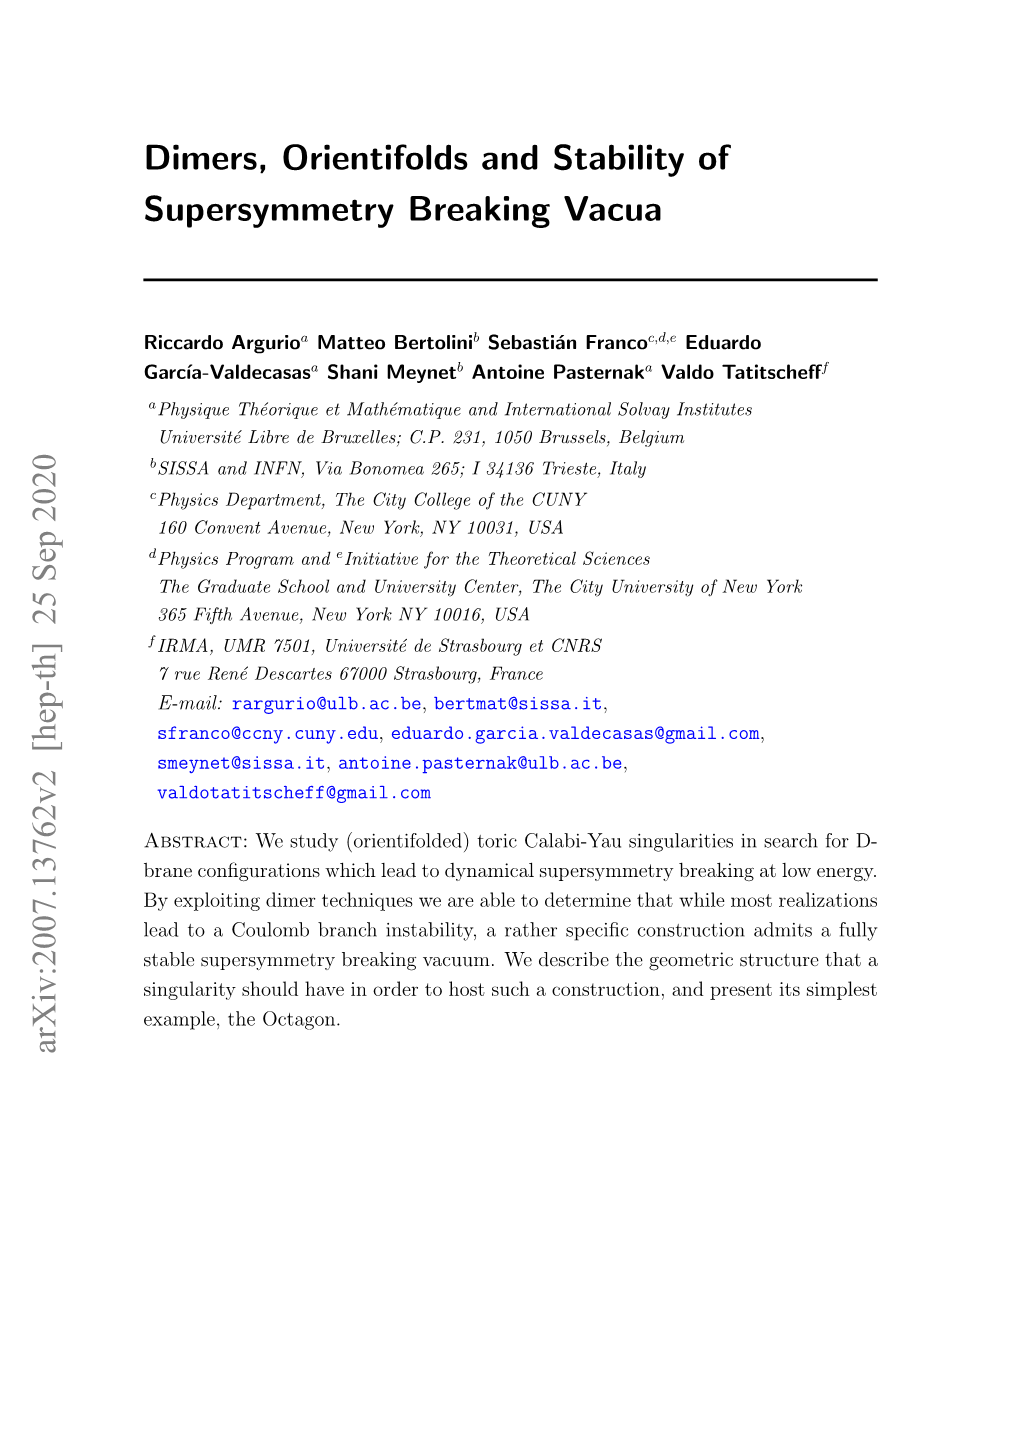 Dimers, Orientifolds and Stability of Supersymmetry Breaking Vacua